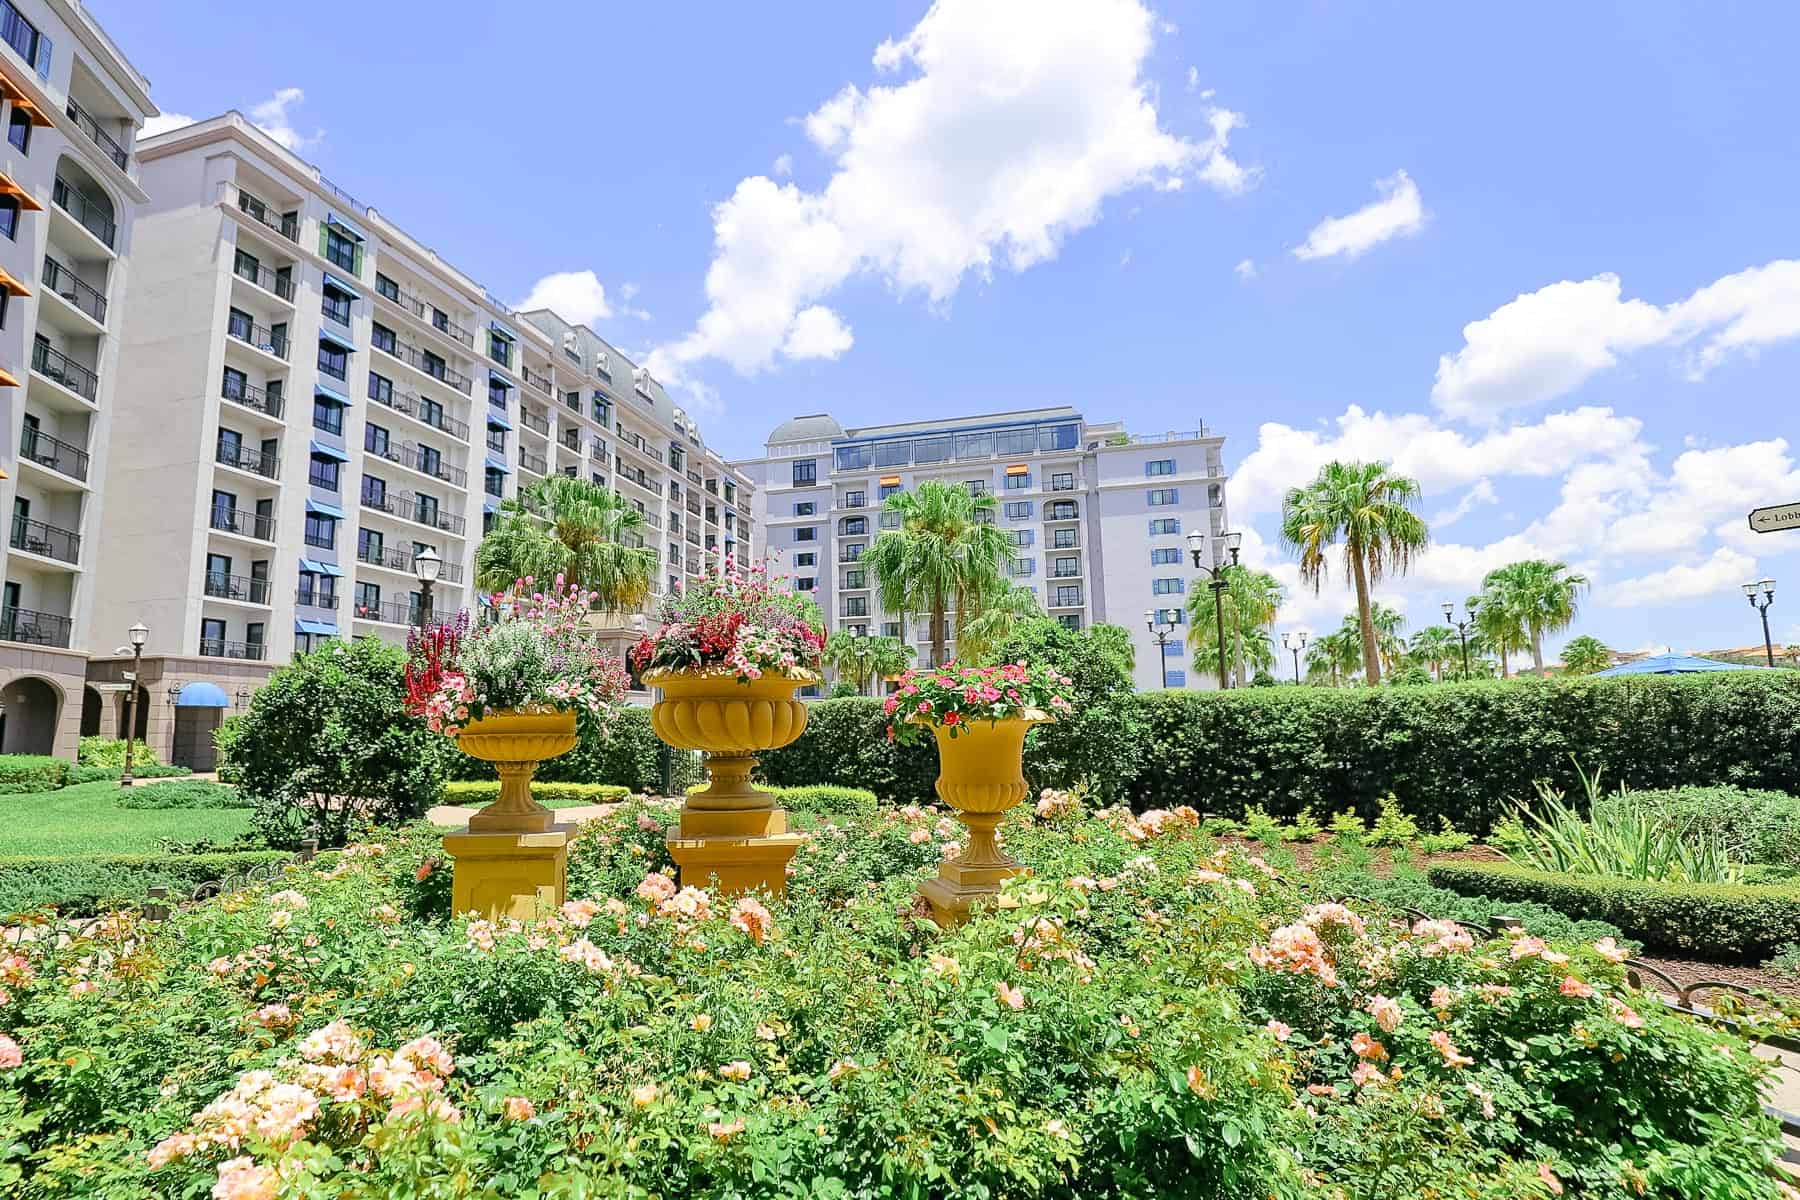 Disney's Riviera Resort with flowers in landscaping. 